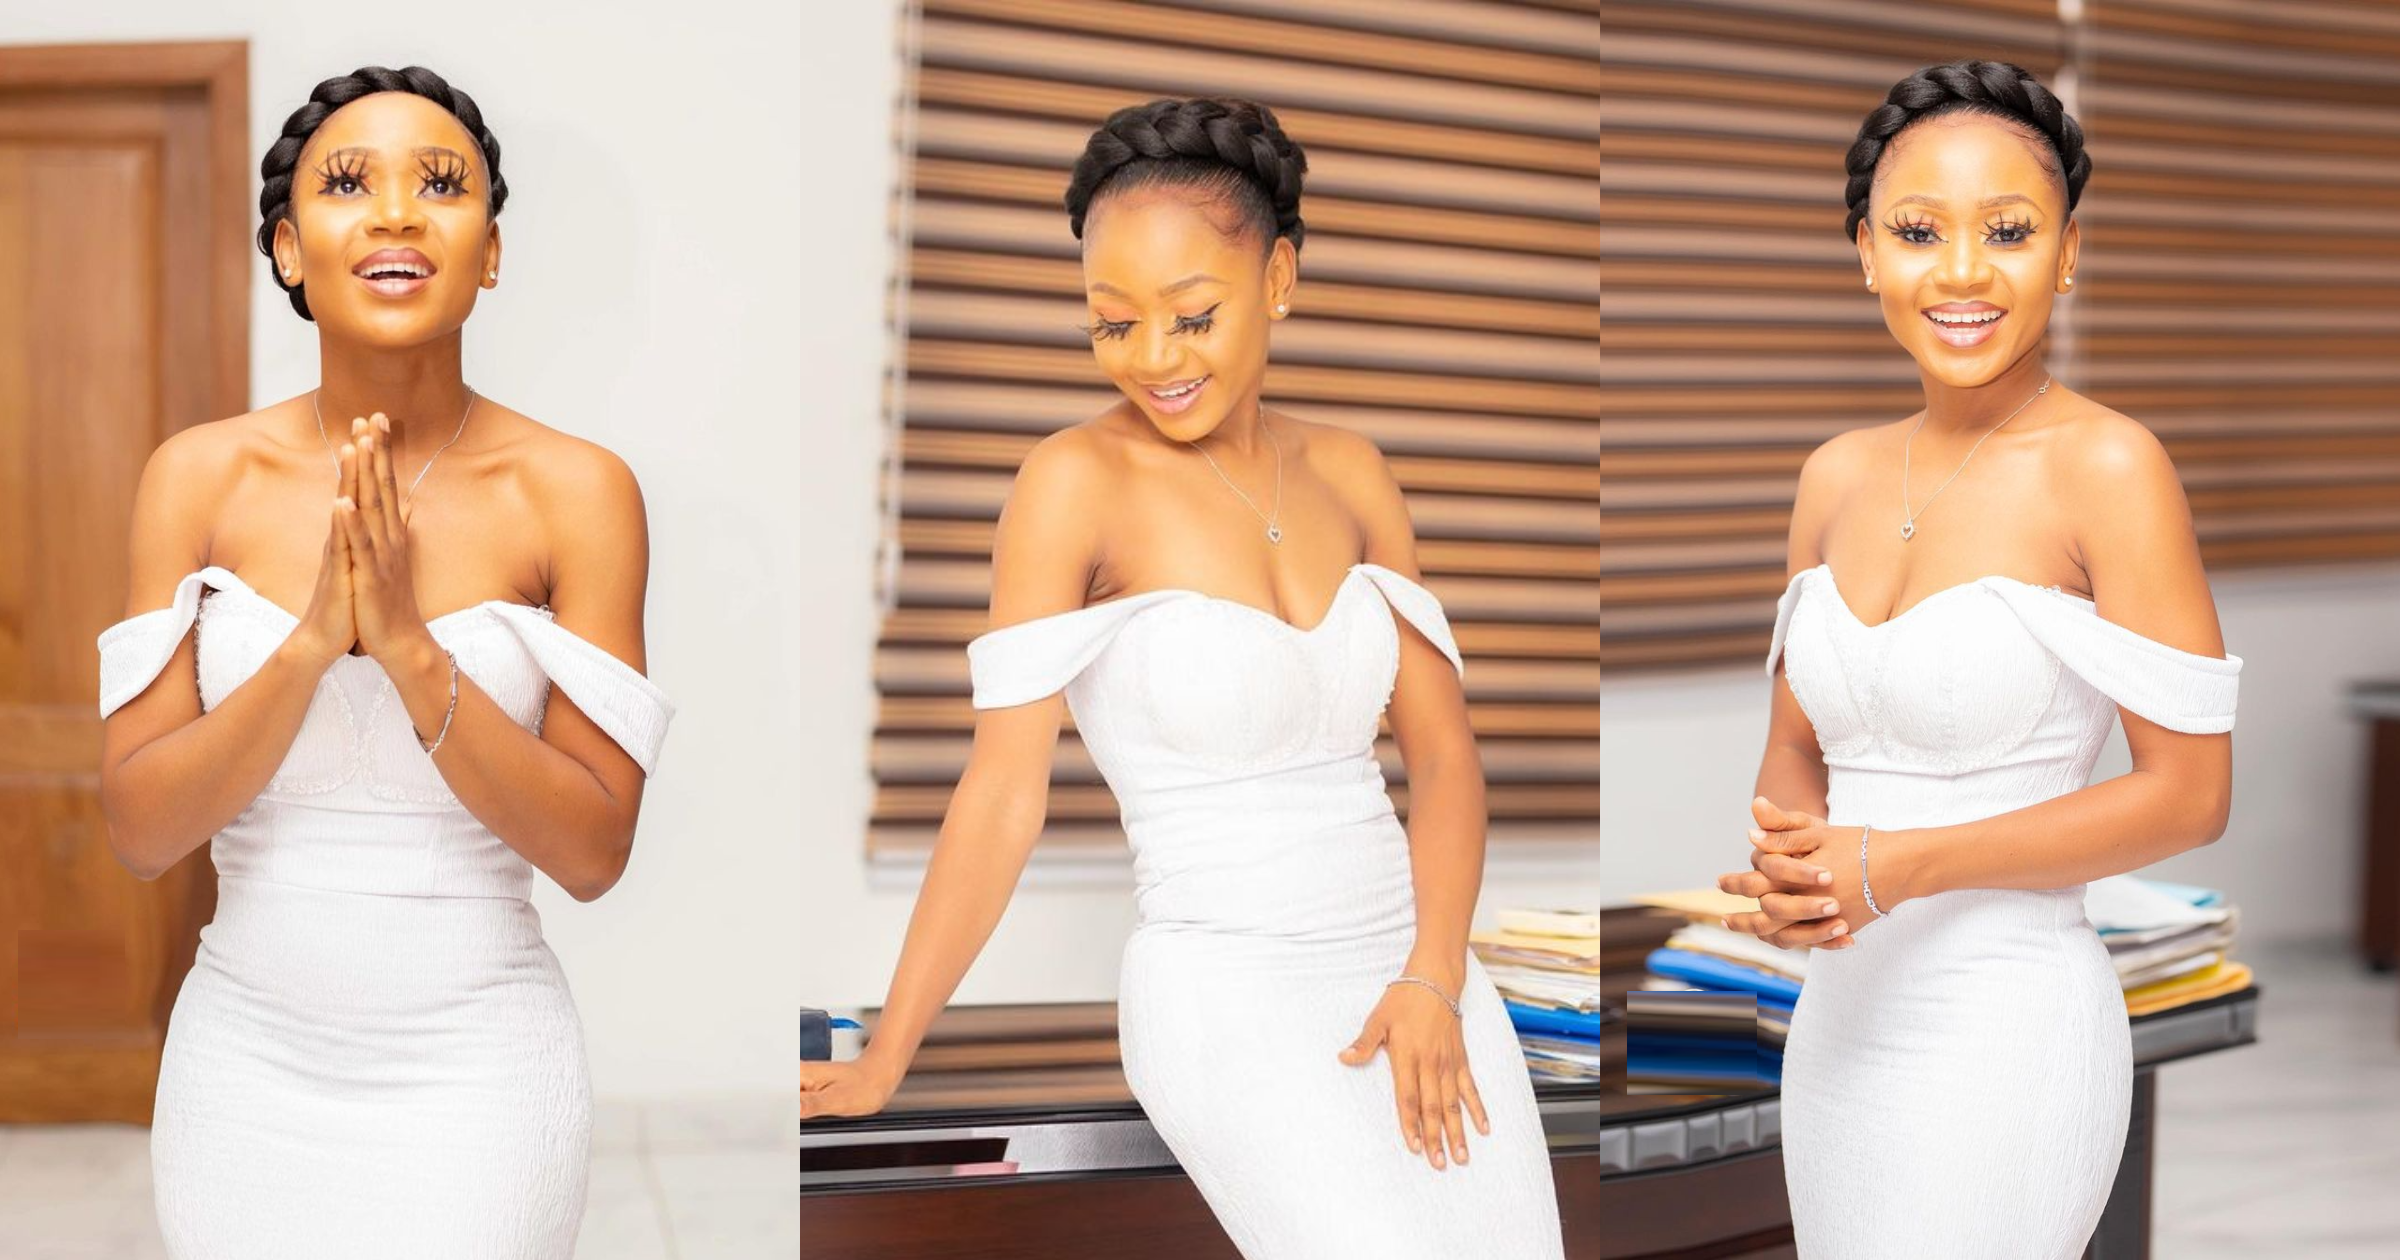 Akuapem Poloo's Father Pops Up For The 1st Time As He Visits Actress (Photo)